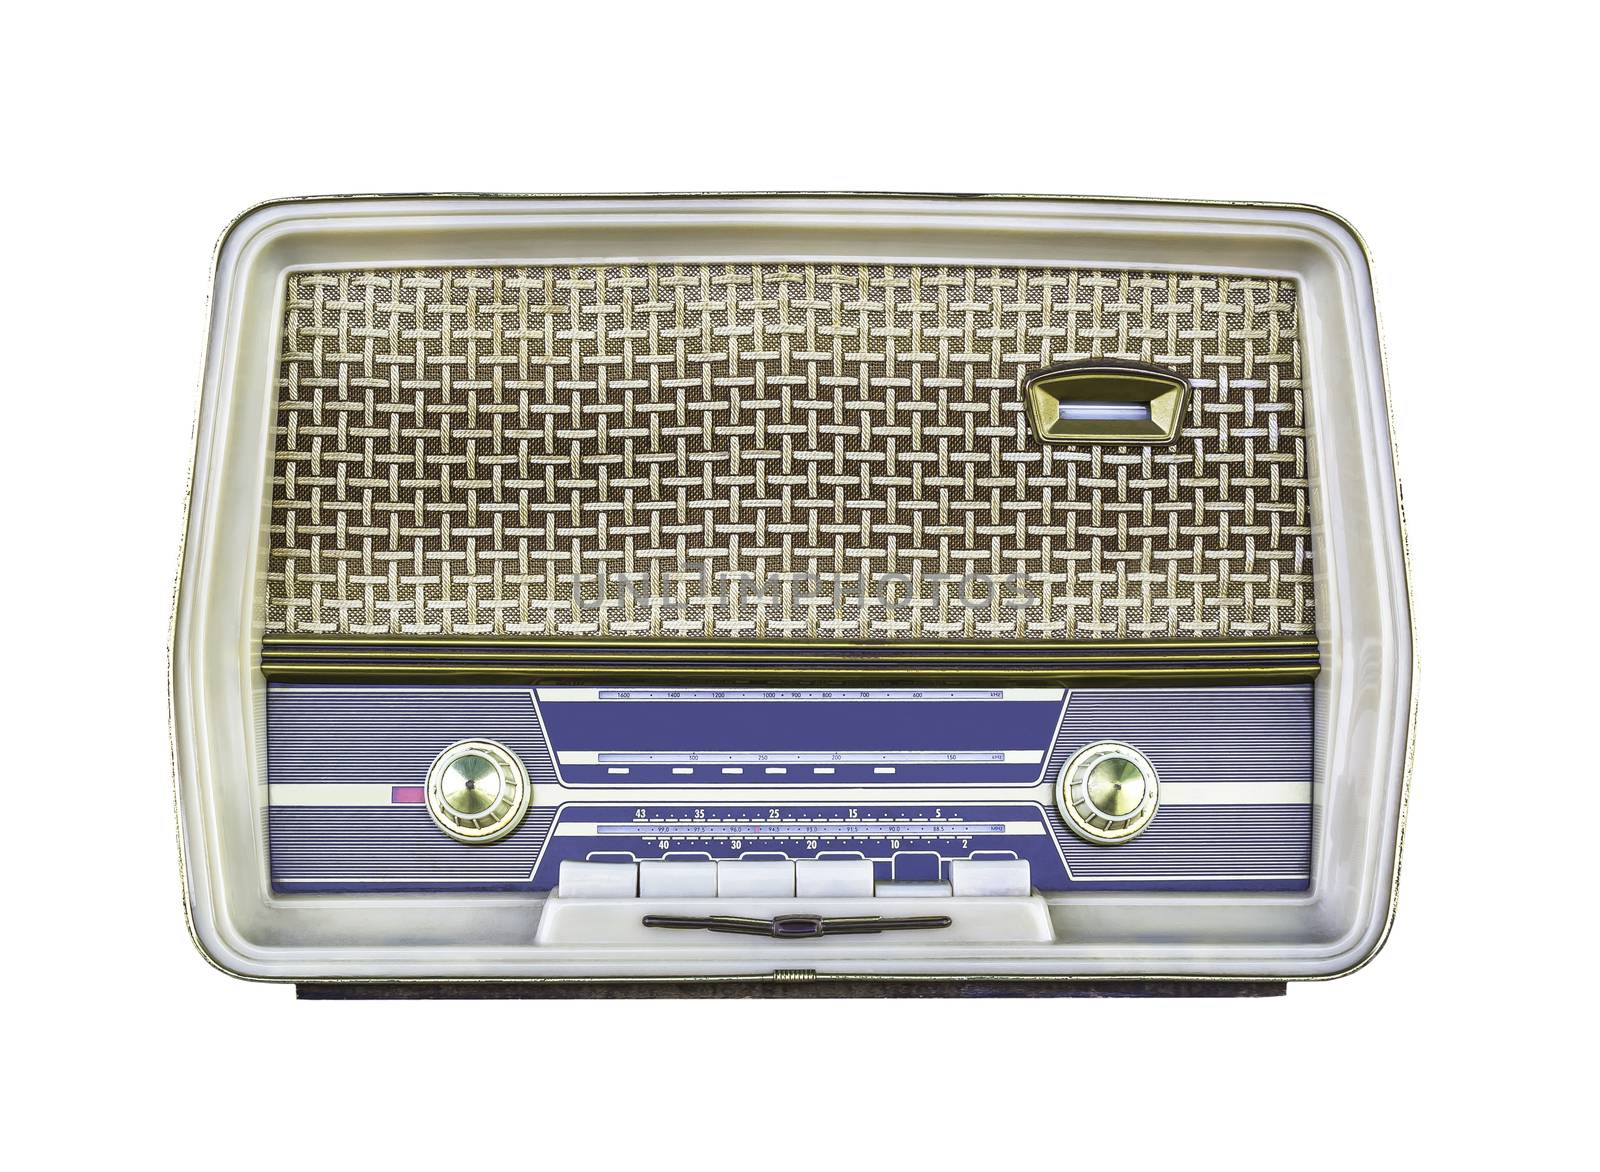 Vintage radio isolated on white with clipping path